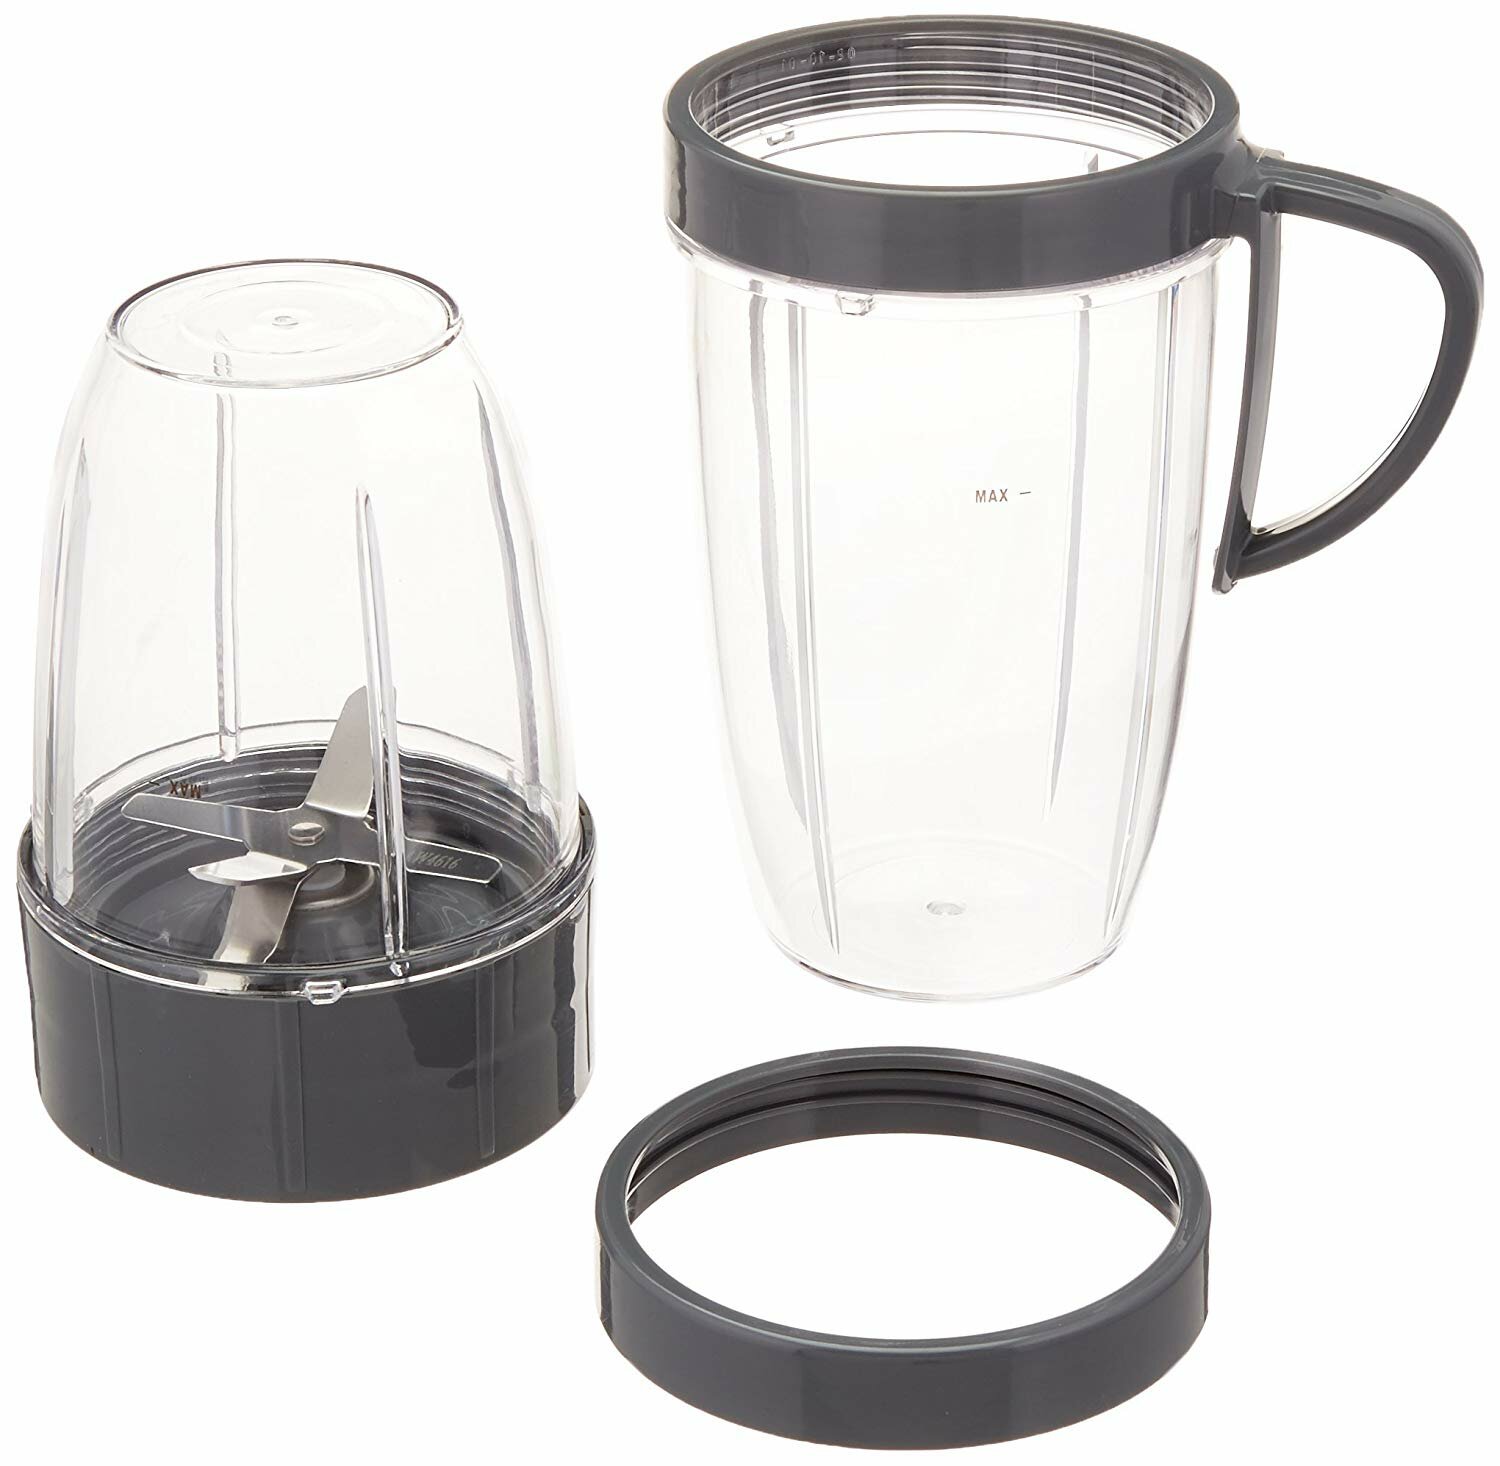 & Accessories with Cup & Reviews | Wayfair